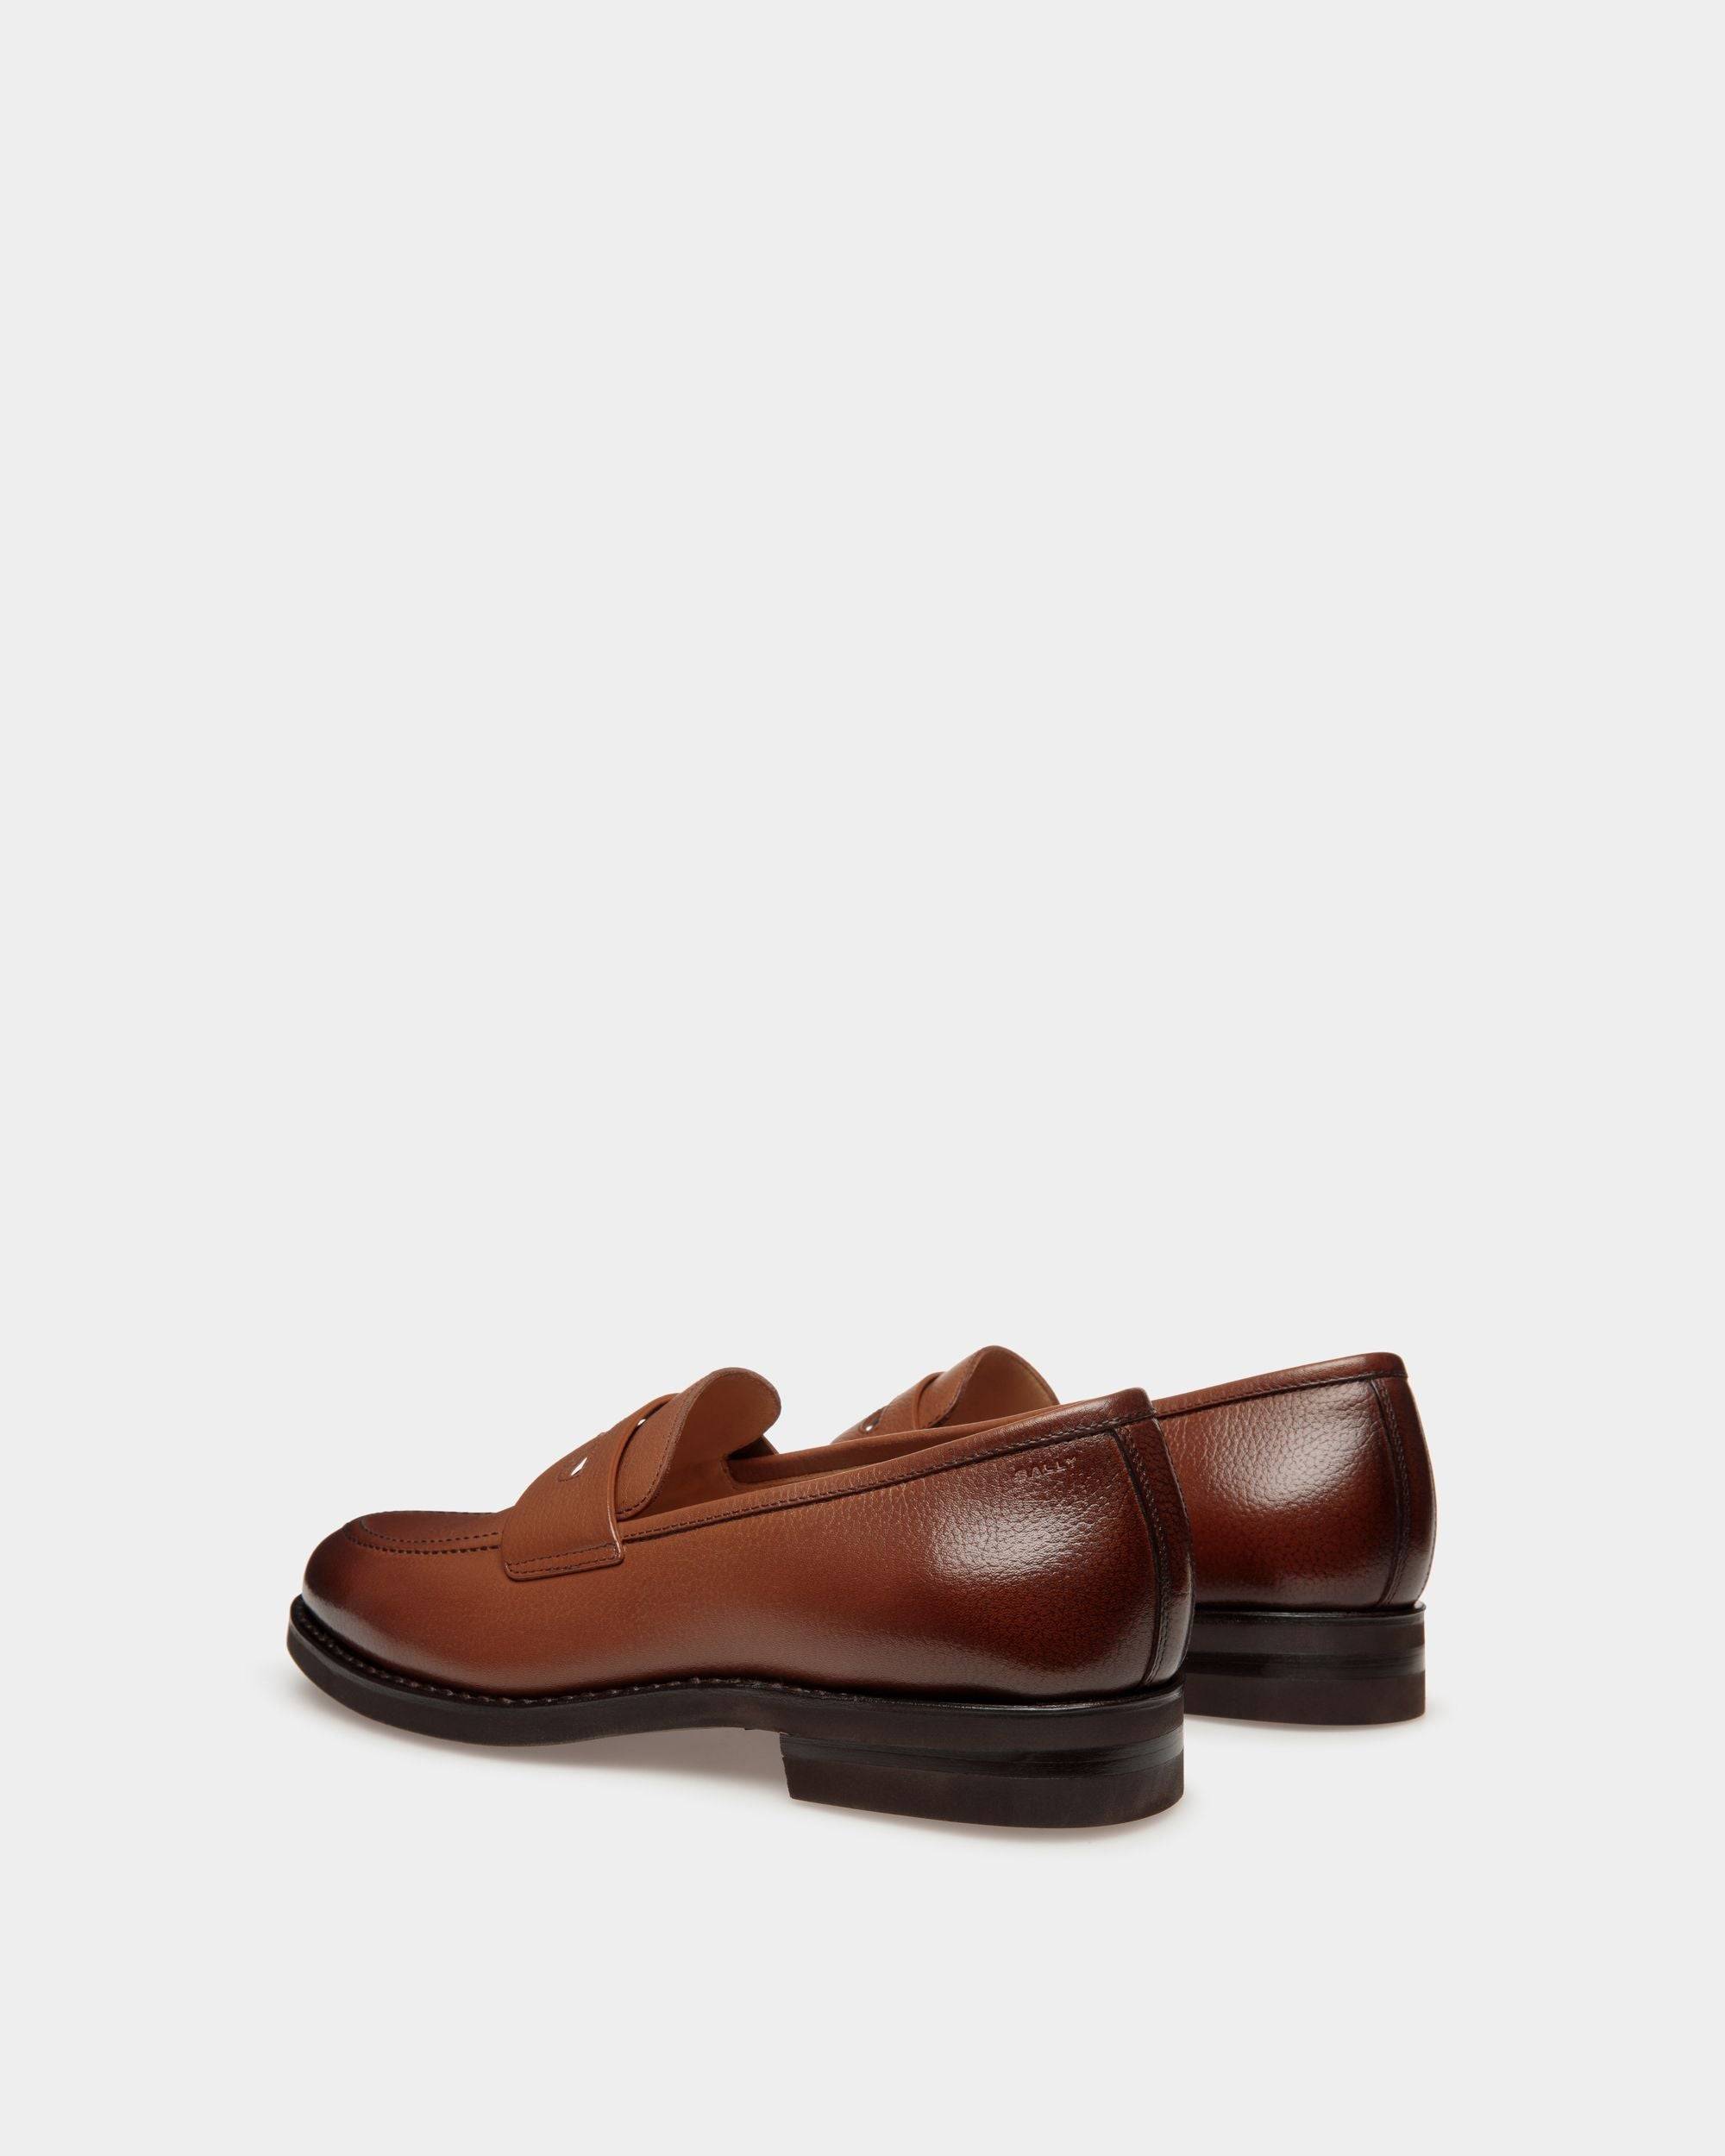 Schoenen | Men's Loafer in Brown Embossed Leather | Bally | Still Life 3/4 Back